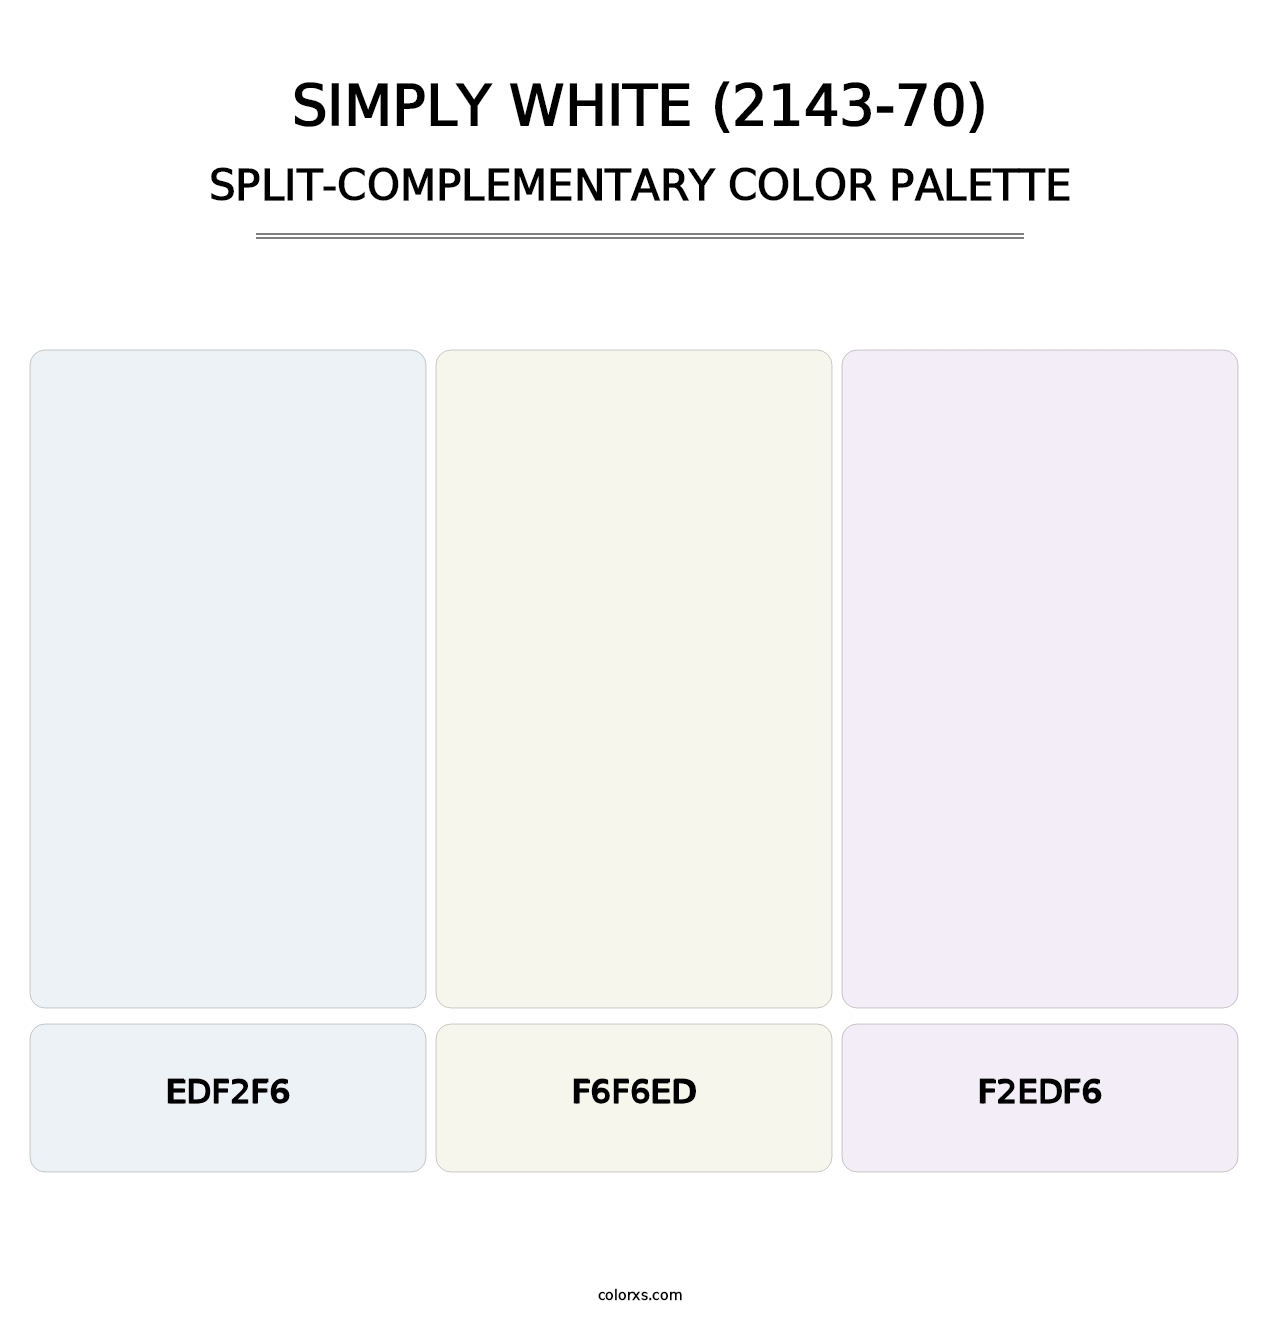 Simply White (2143-70) - Split-Complementary Color Palette